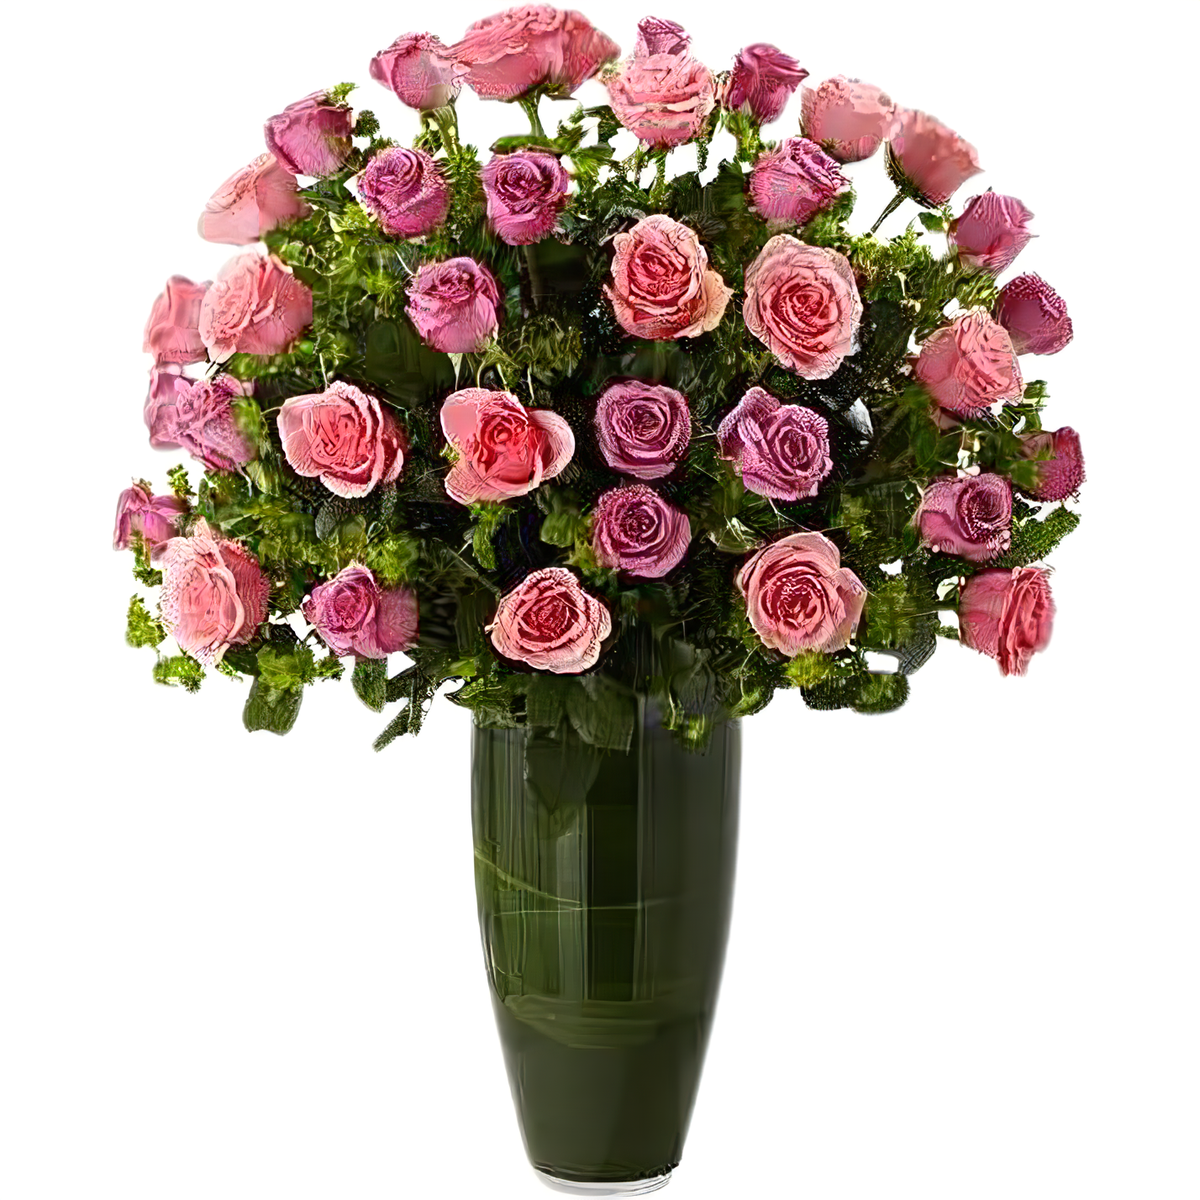 Luxury Rose Bouquet - 24 Premium Pink &amp; Lavender Long-Stem Roses - Products &gt; Luxury Collection